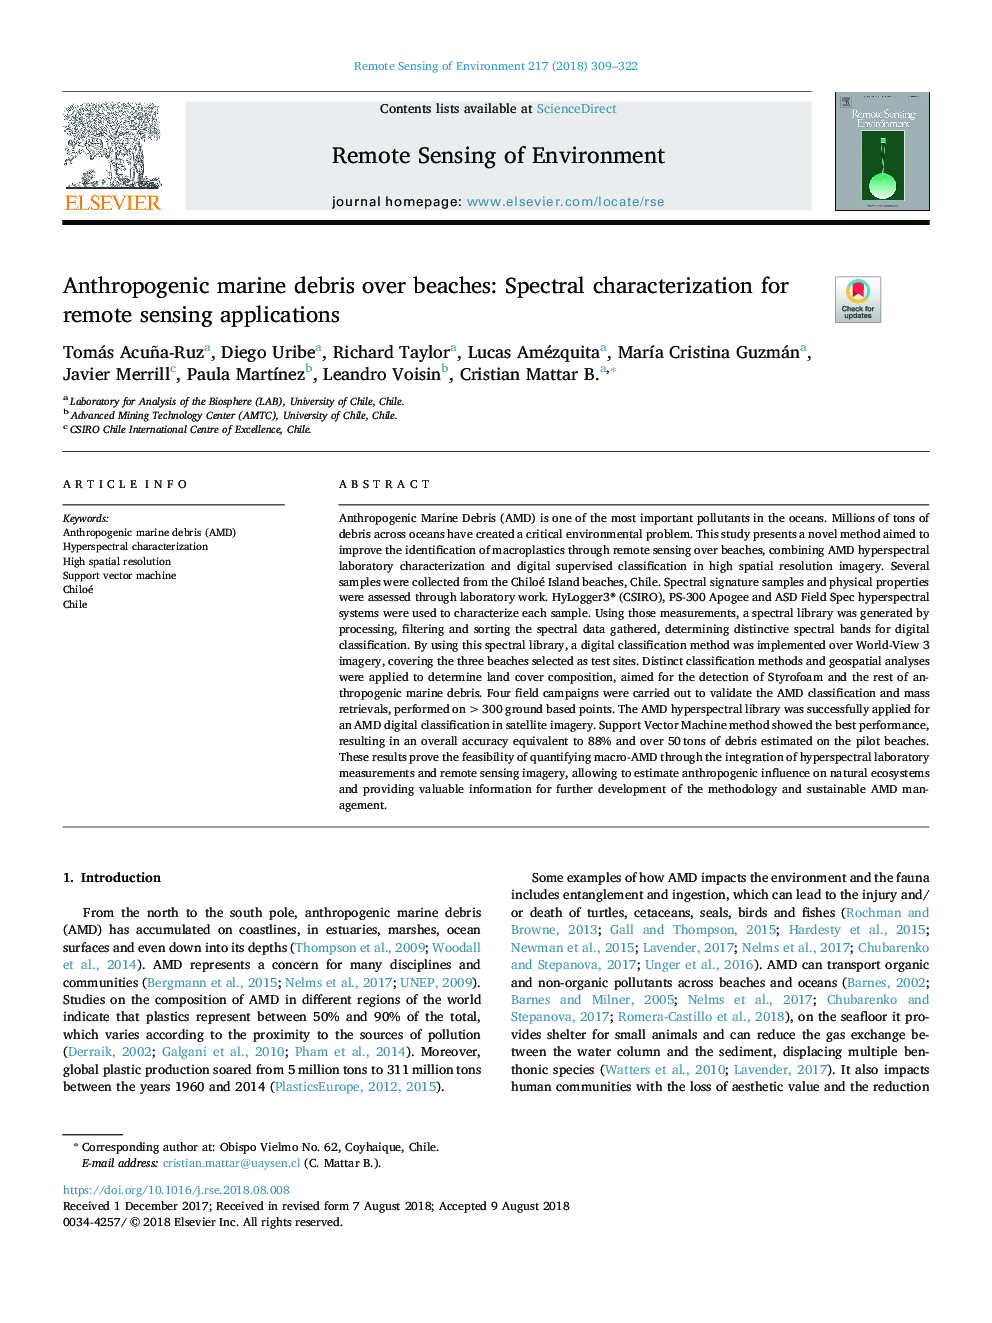 Anthropogenic marine debris over beaches: Spectral characterization for remote sensing applications